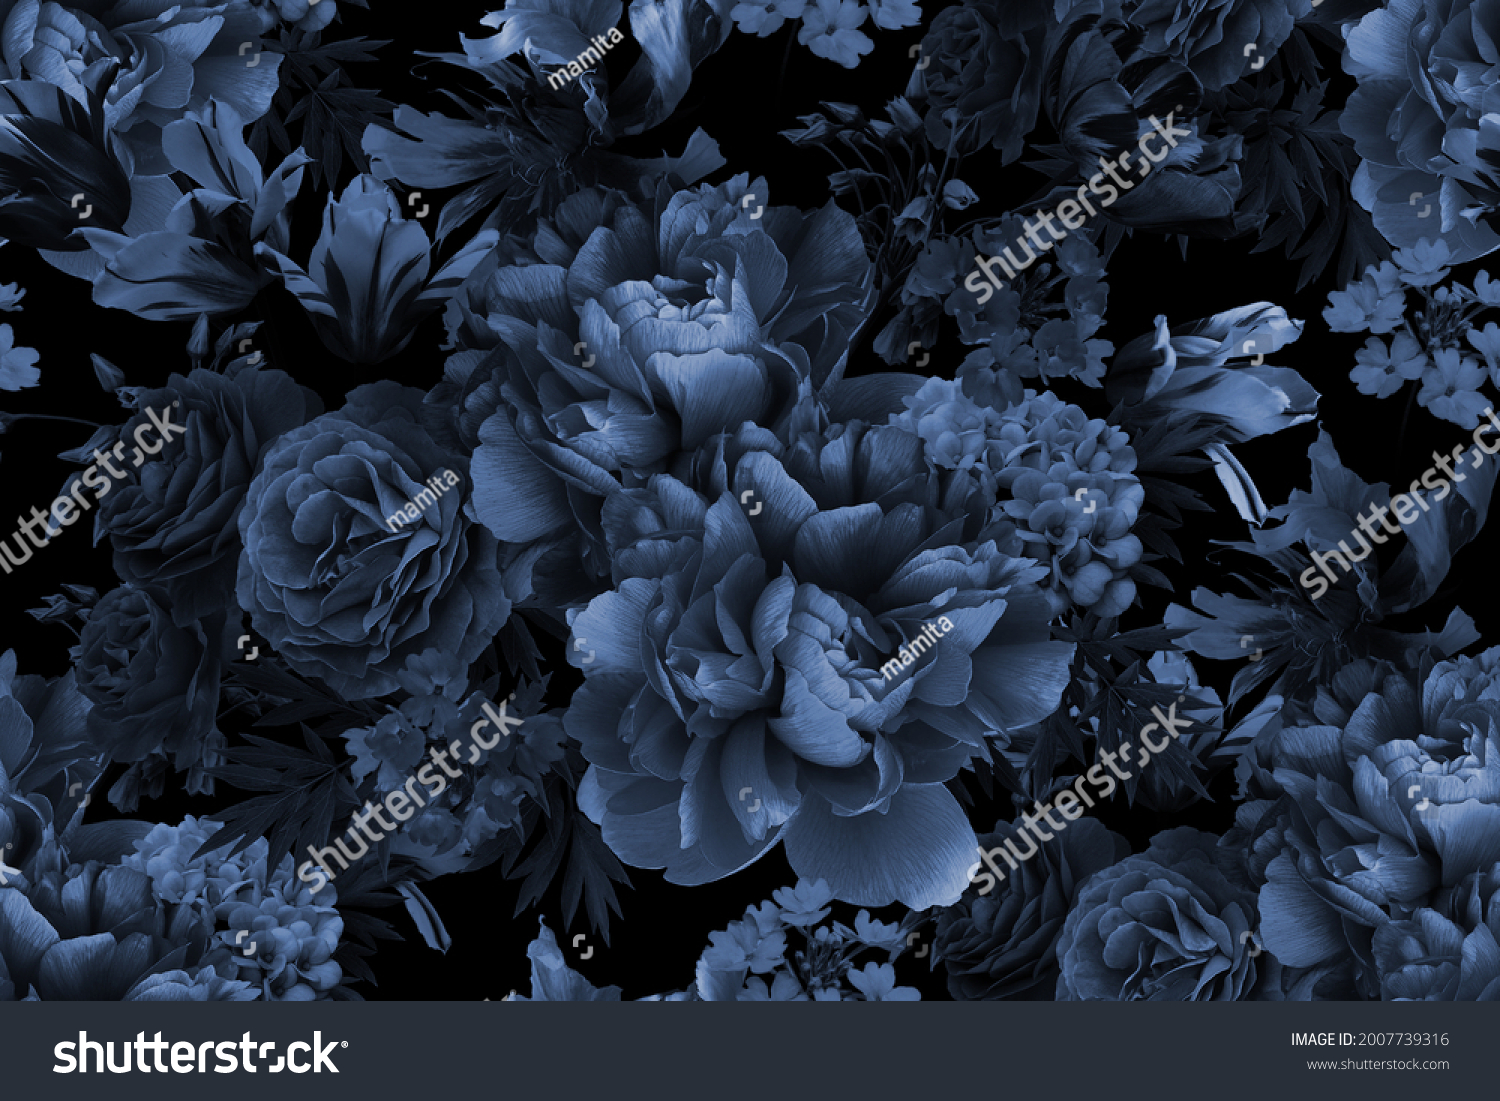 Floral vintage seamless pattern. Blooming peonies, roses, tulips, garden flowers, decorative herbs, leaves. Black and white background. For decoration packaging, interior, textile, paper, wallpaper. #2007739316